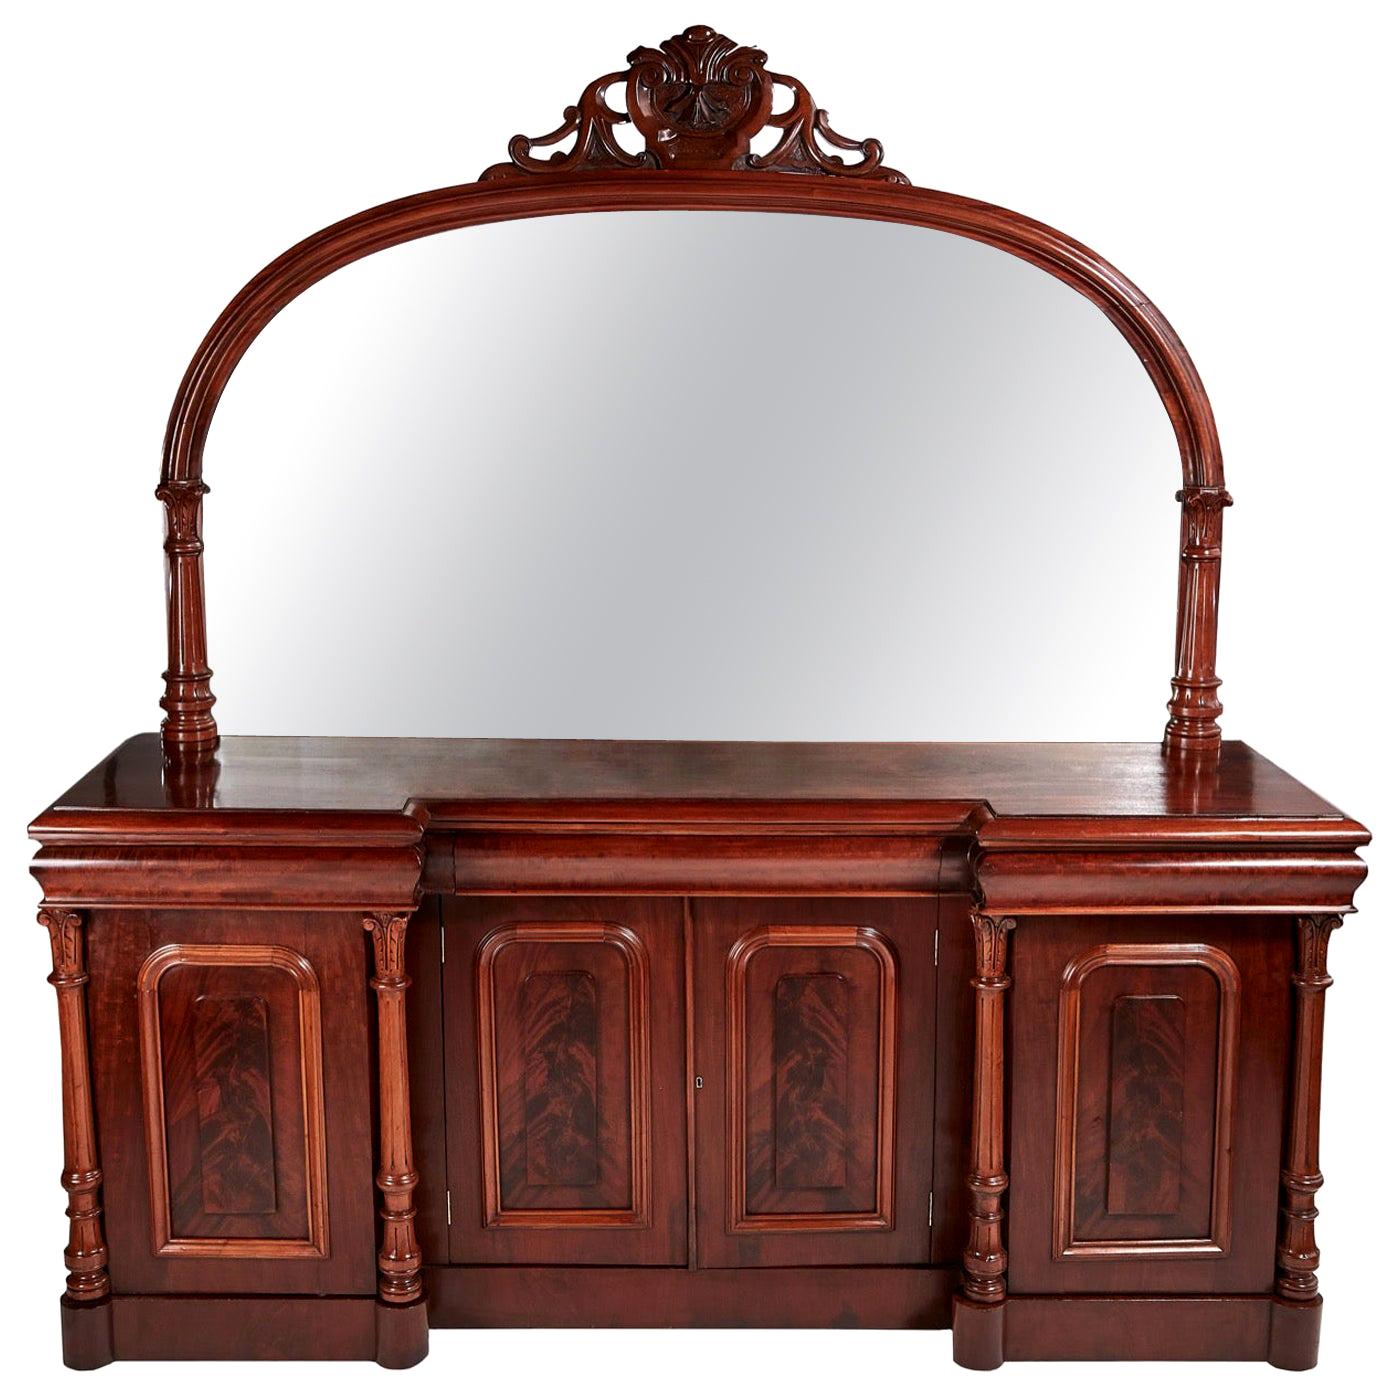 Outstanding Quality Antique Victorian Mahogany Mirrored Sideboard For Sale